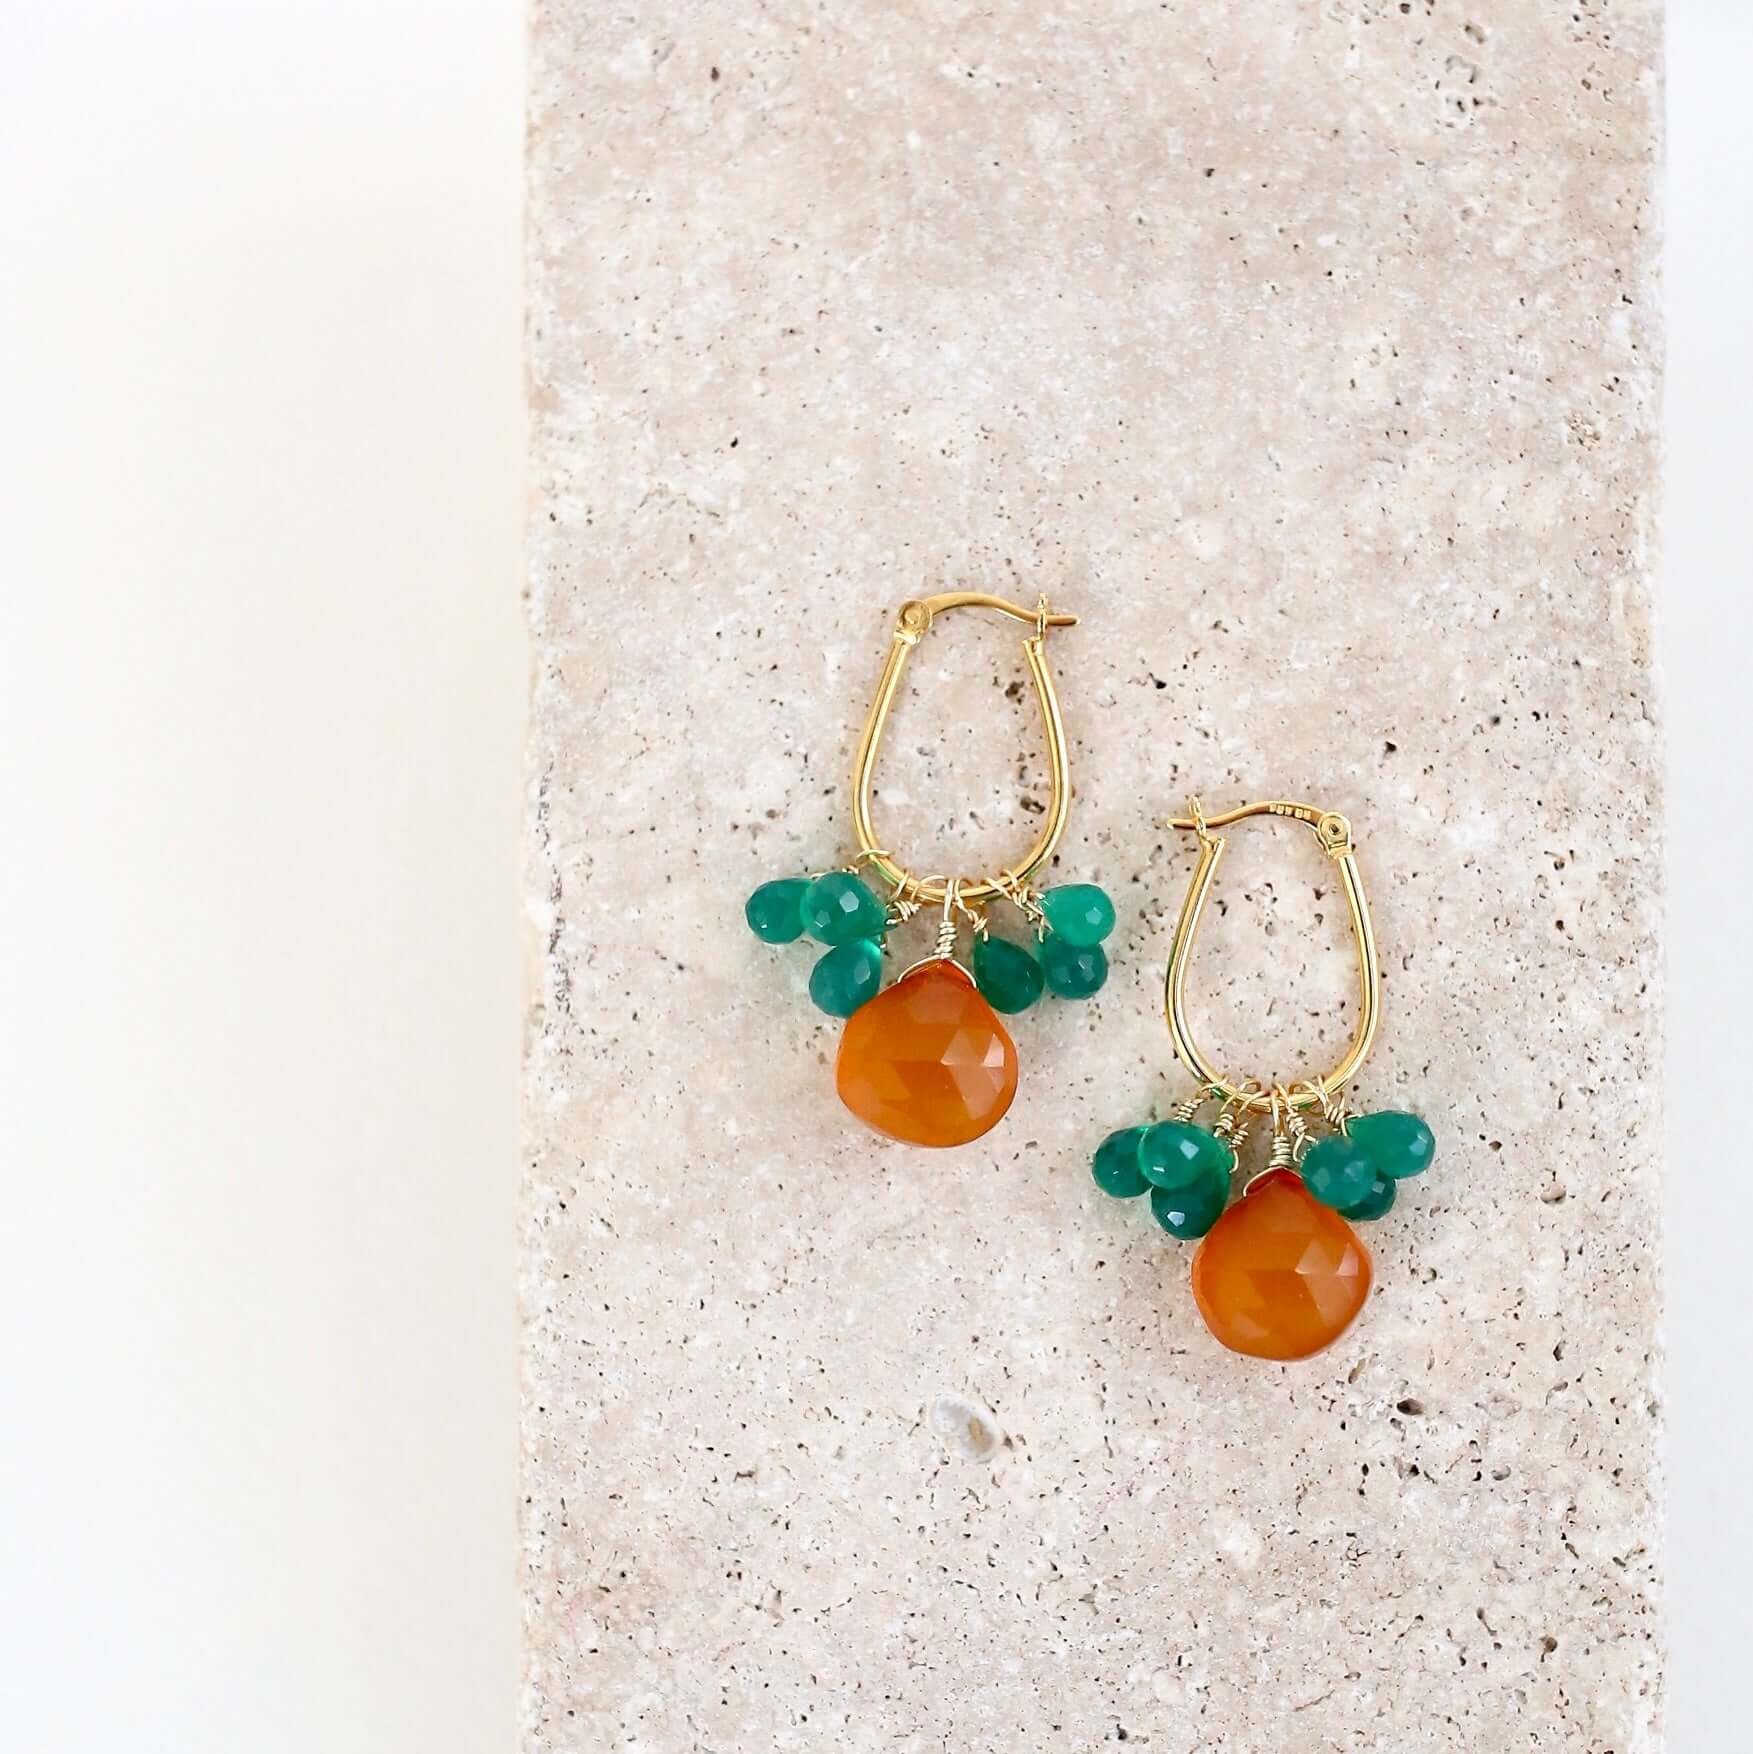 Small Yet Mighty Earrings with Dark Orange Chalcedony and Green Onyx Briolettes